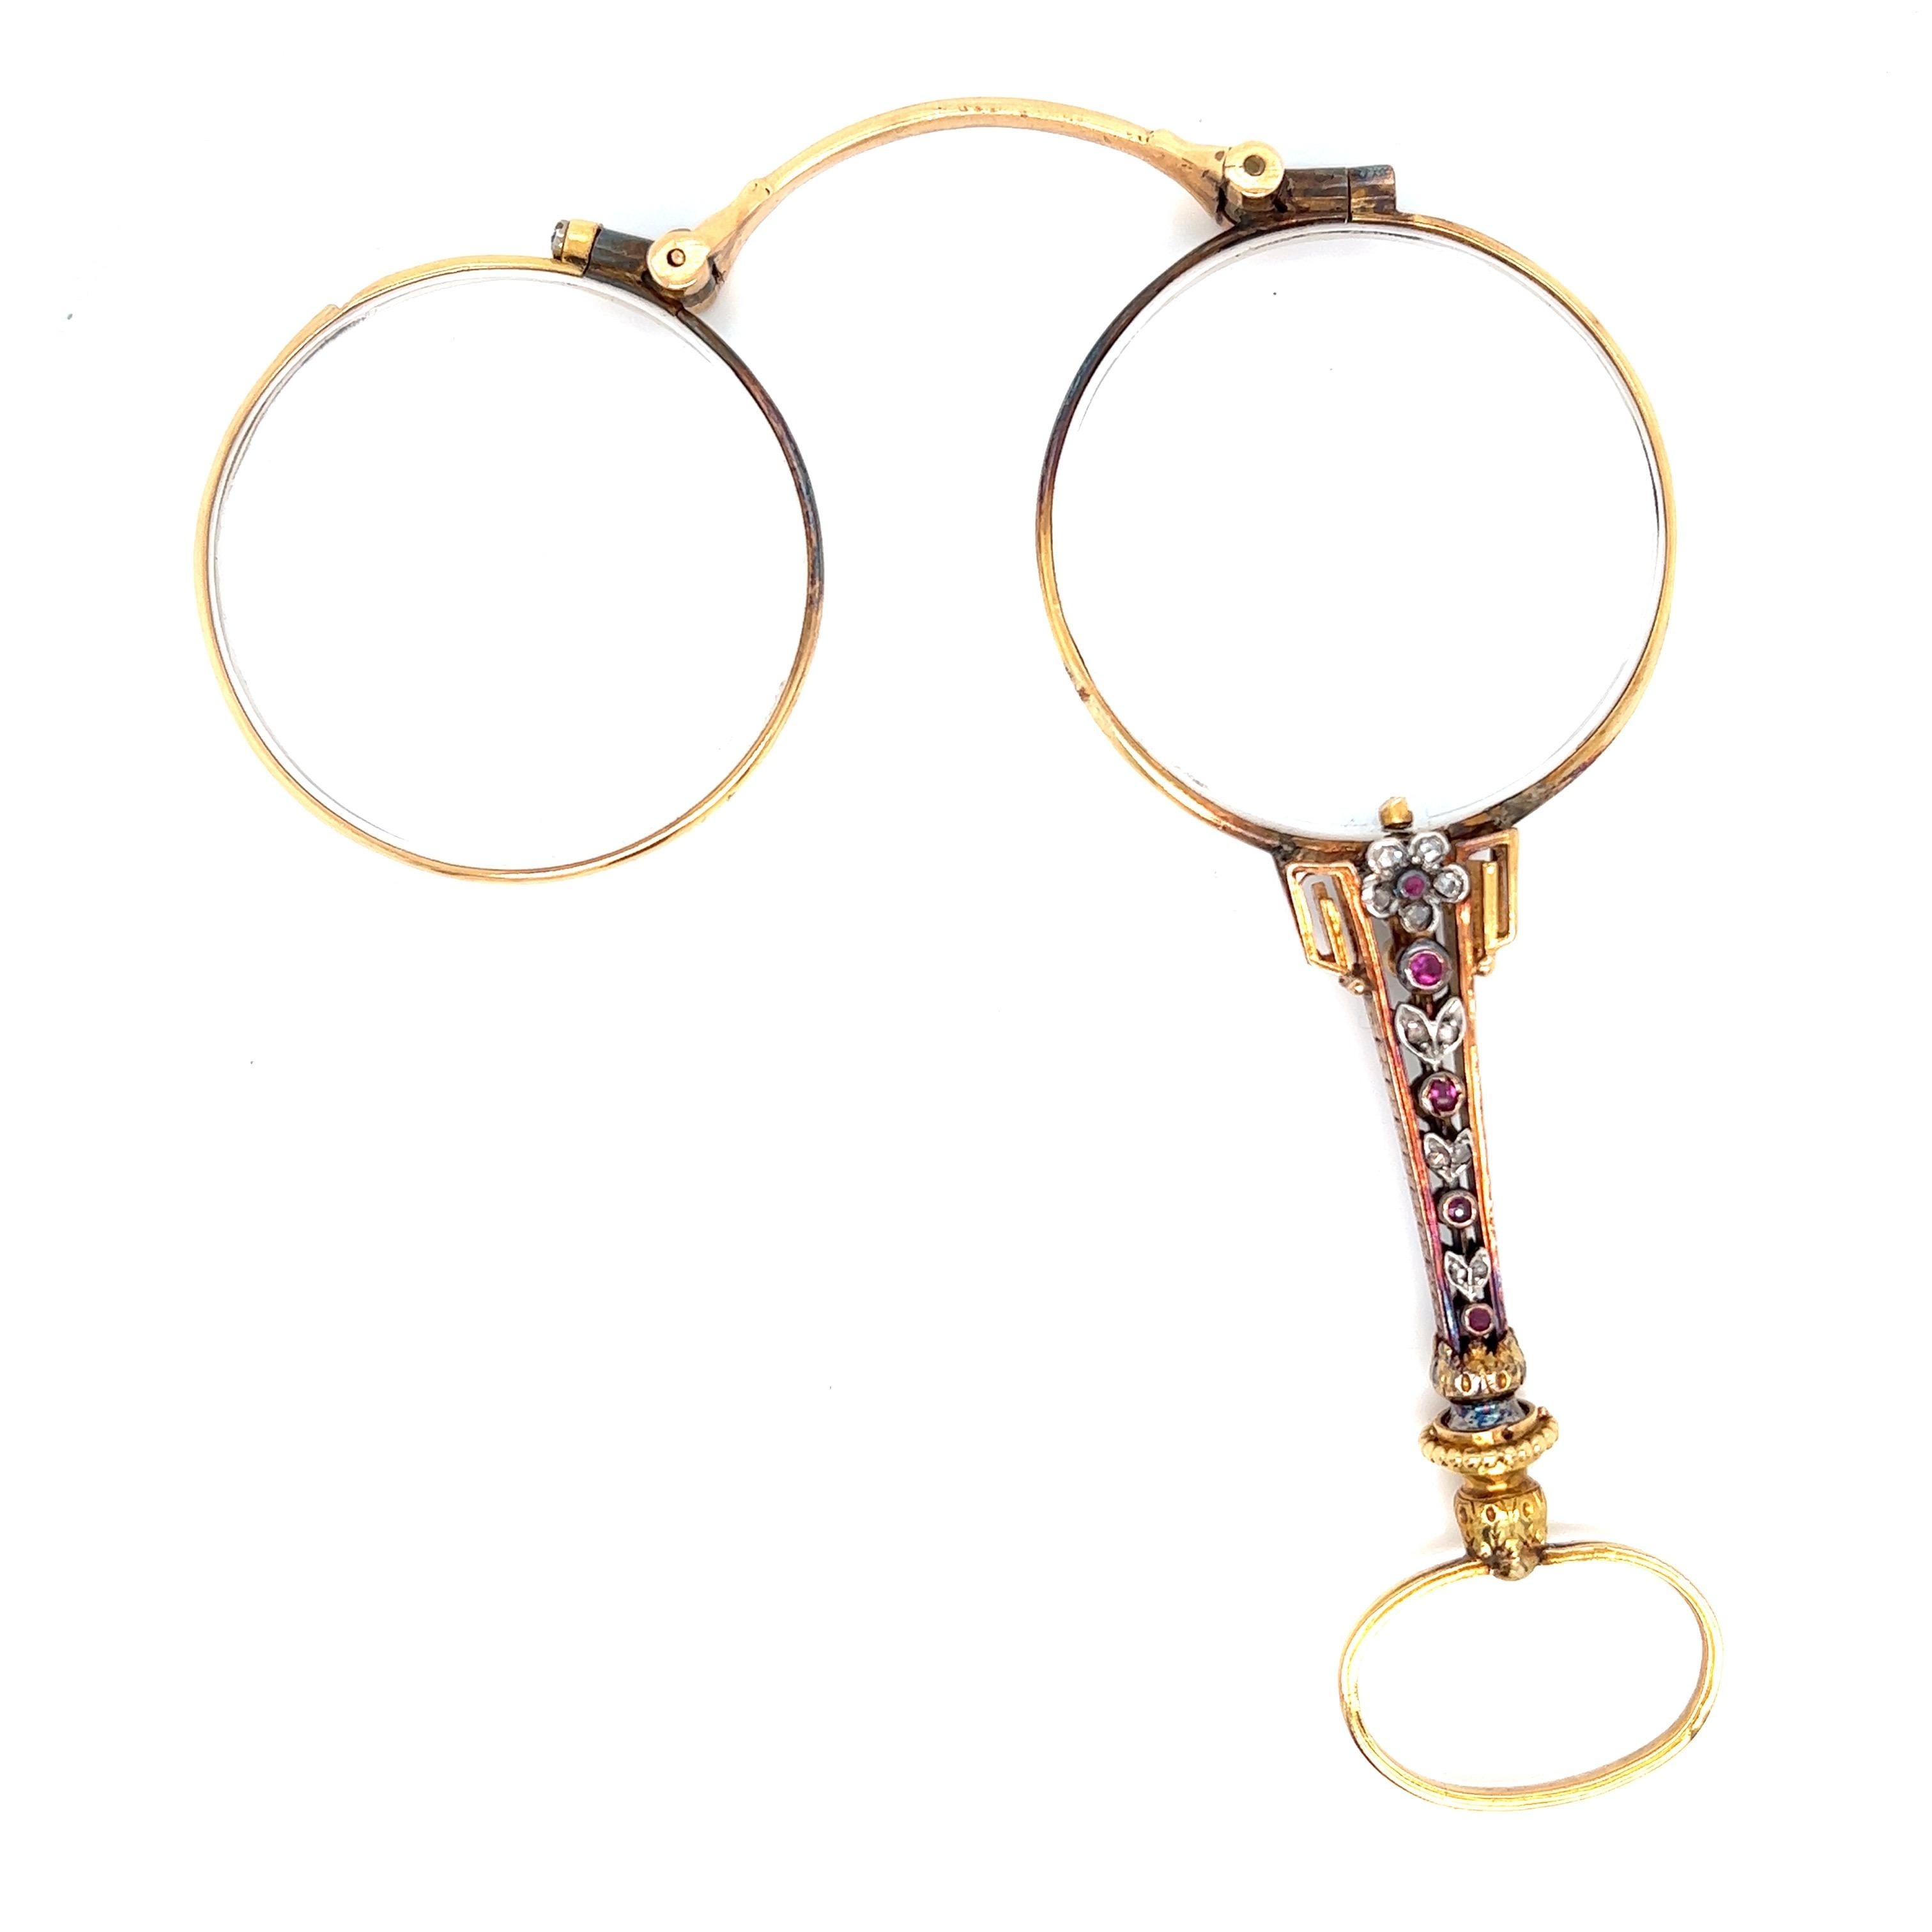 Antique French yellow gold lorgnette with folding round lenses

Handle is set with white gold flowerhead and leaves, eleven rose-cut diamonds and five bezel-set round rubies on each side 

Size: length 4 inches; glasses: width 1.5 inches
Total